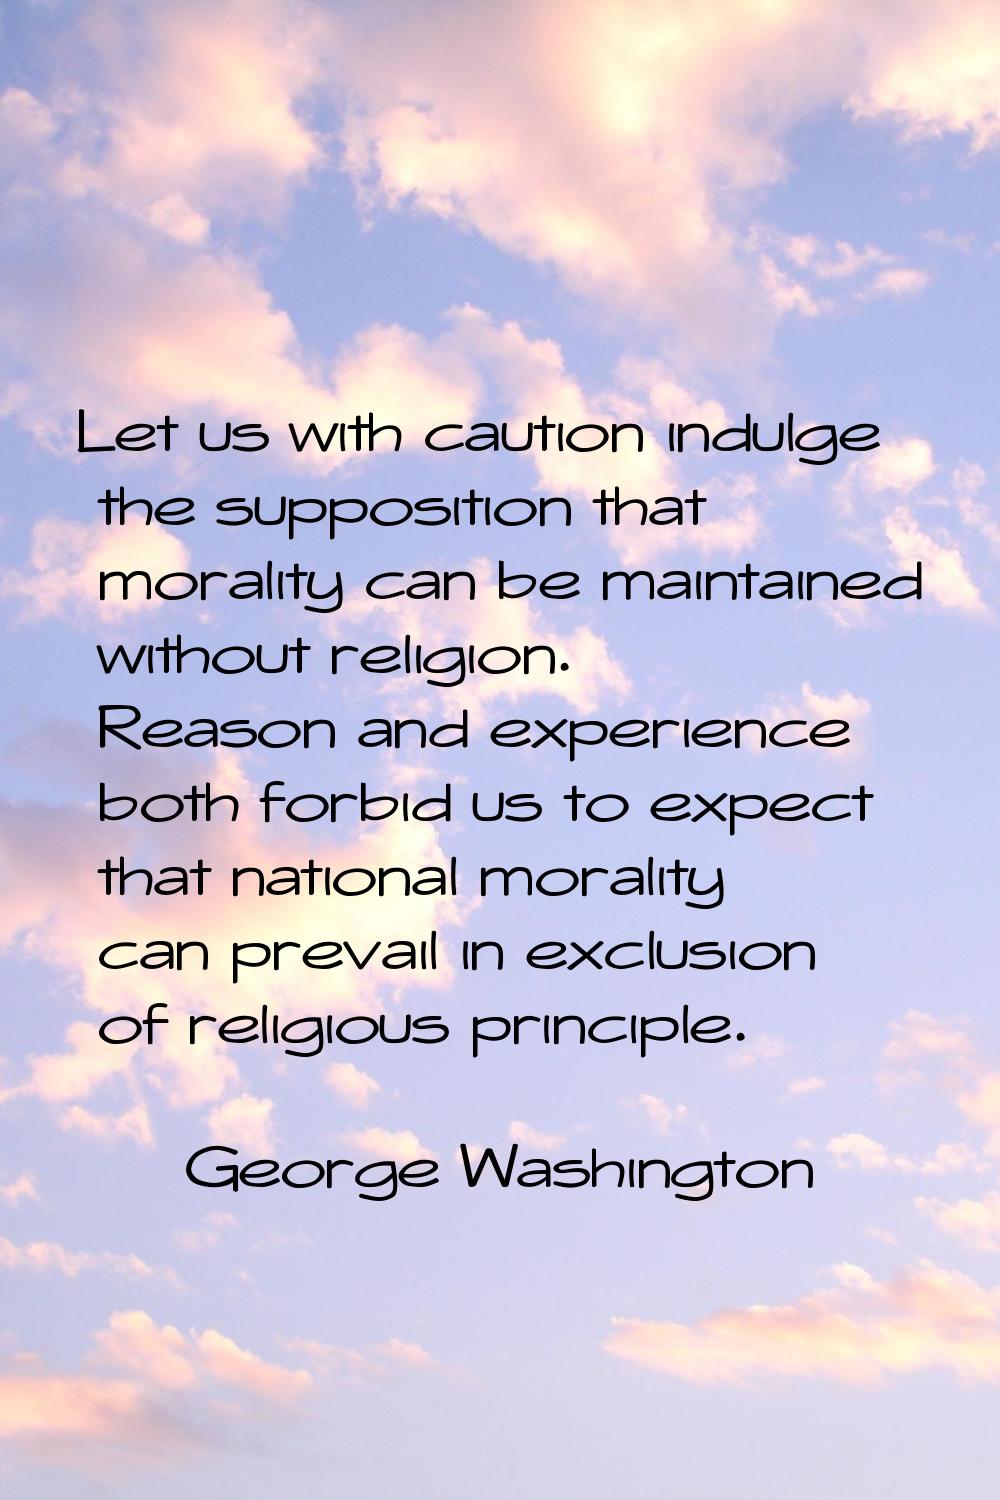 Let us with caution indulge the supposition that morality can be maintained without religion. Reaso